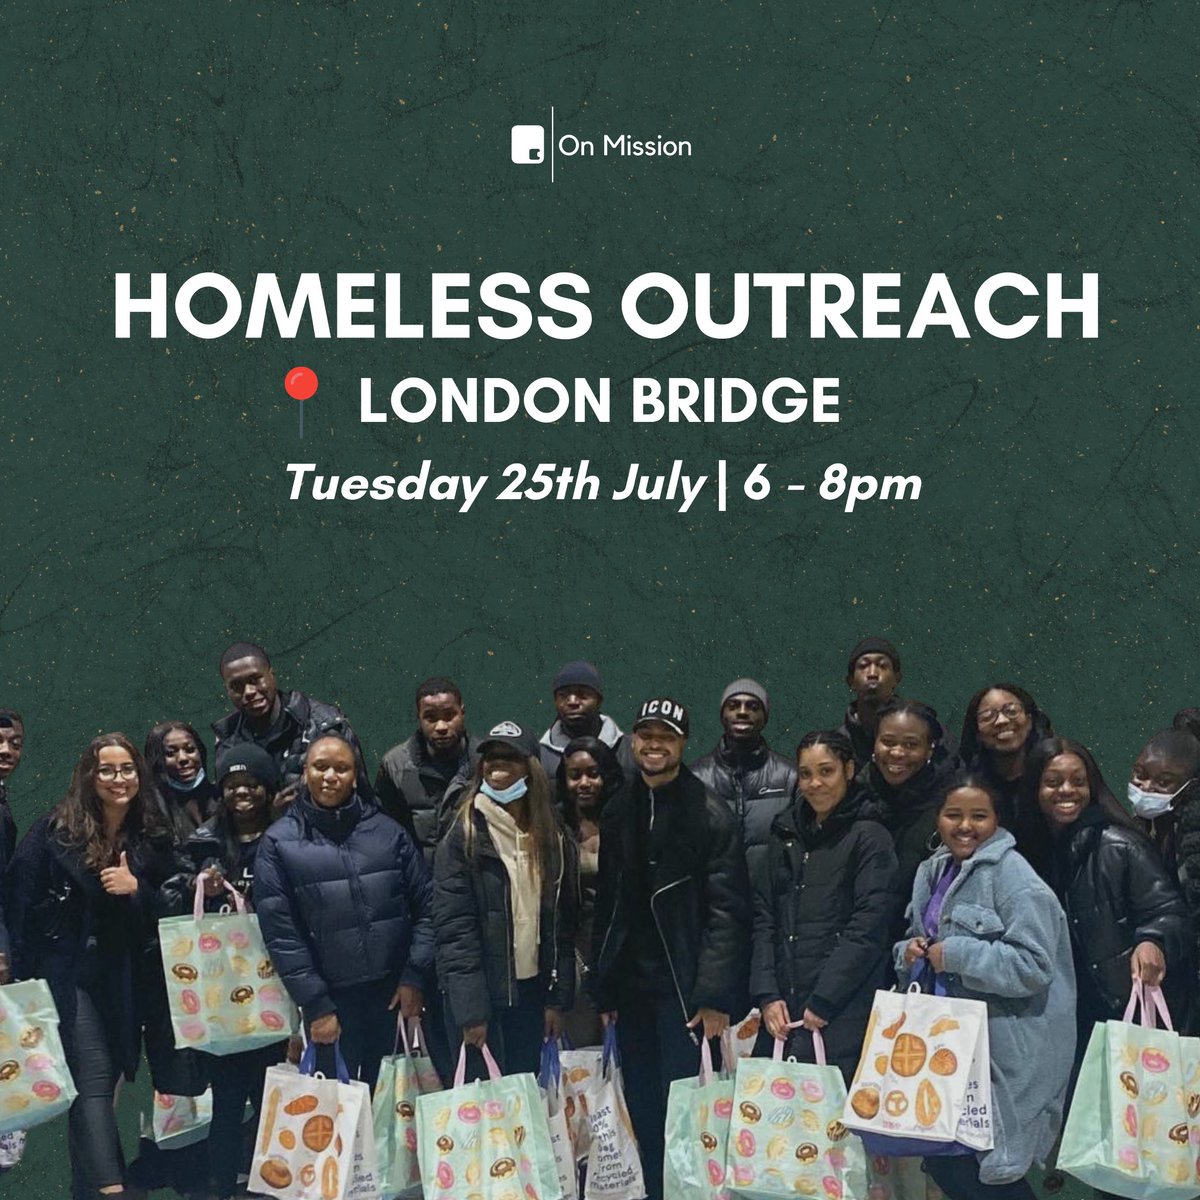 Homeless outreach!

We’ll be hearing their stories, donating essentials and most importantly sharing the gospel of Jesus with them!

We’ll see you there!

#onmission #homelessoutreach